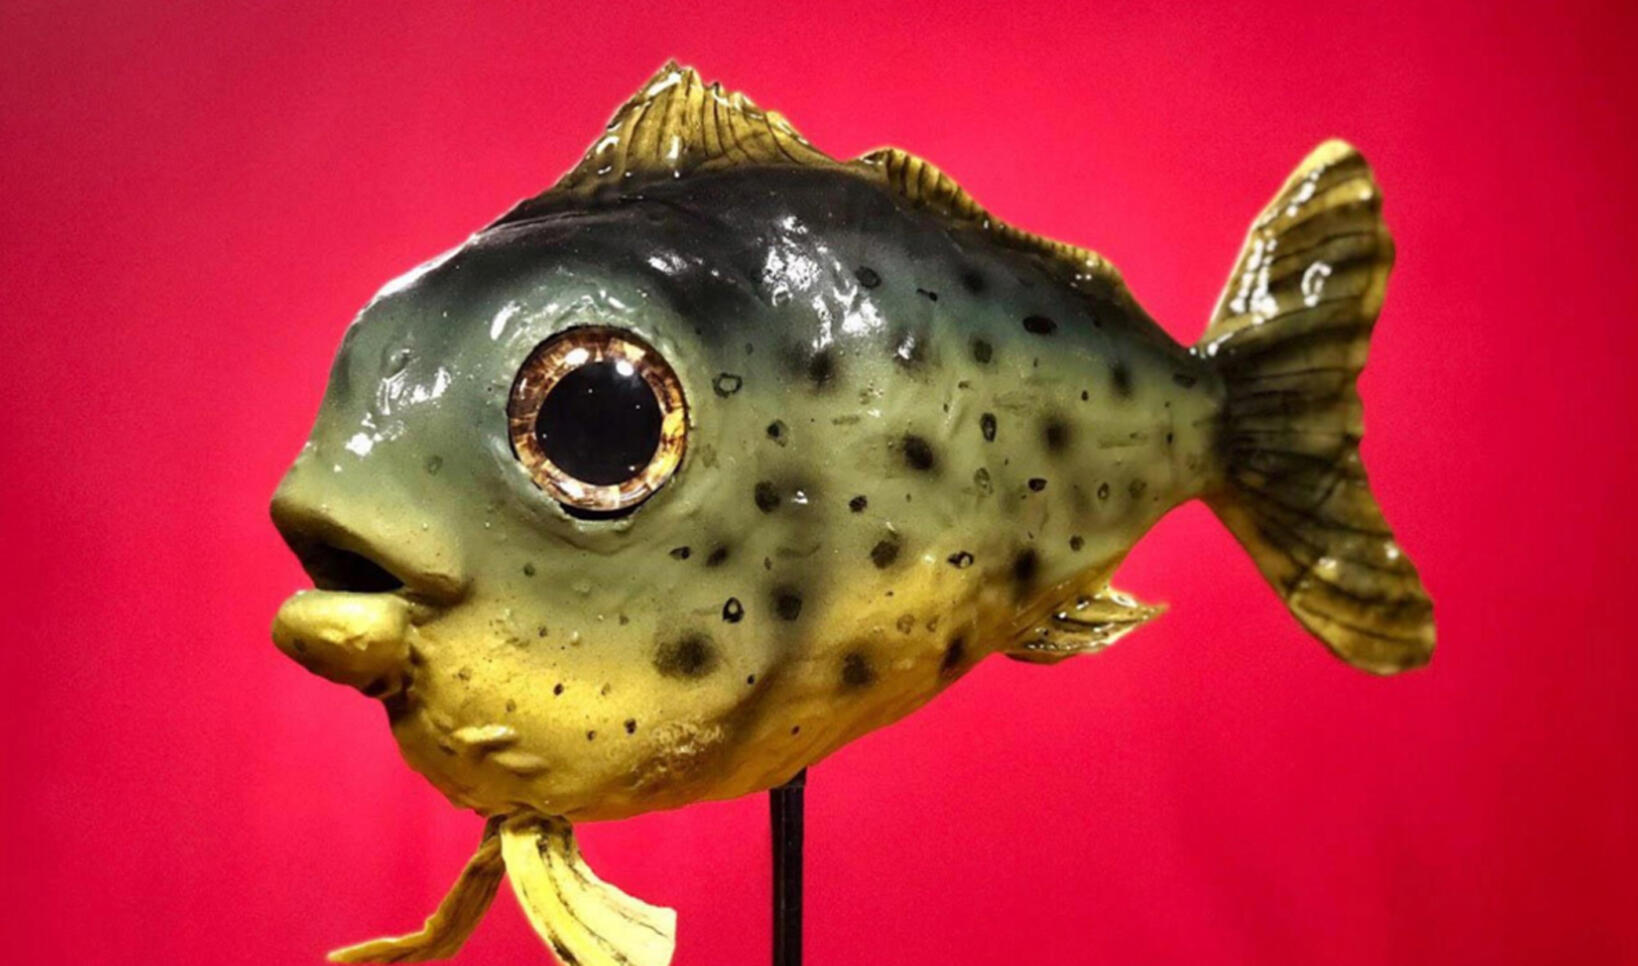 Sculpture of a fish on a red background ; Katie Maren Nelson